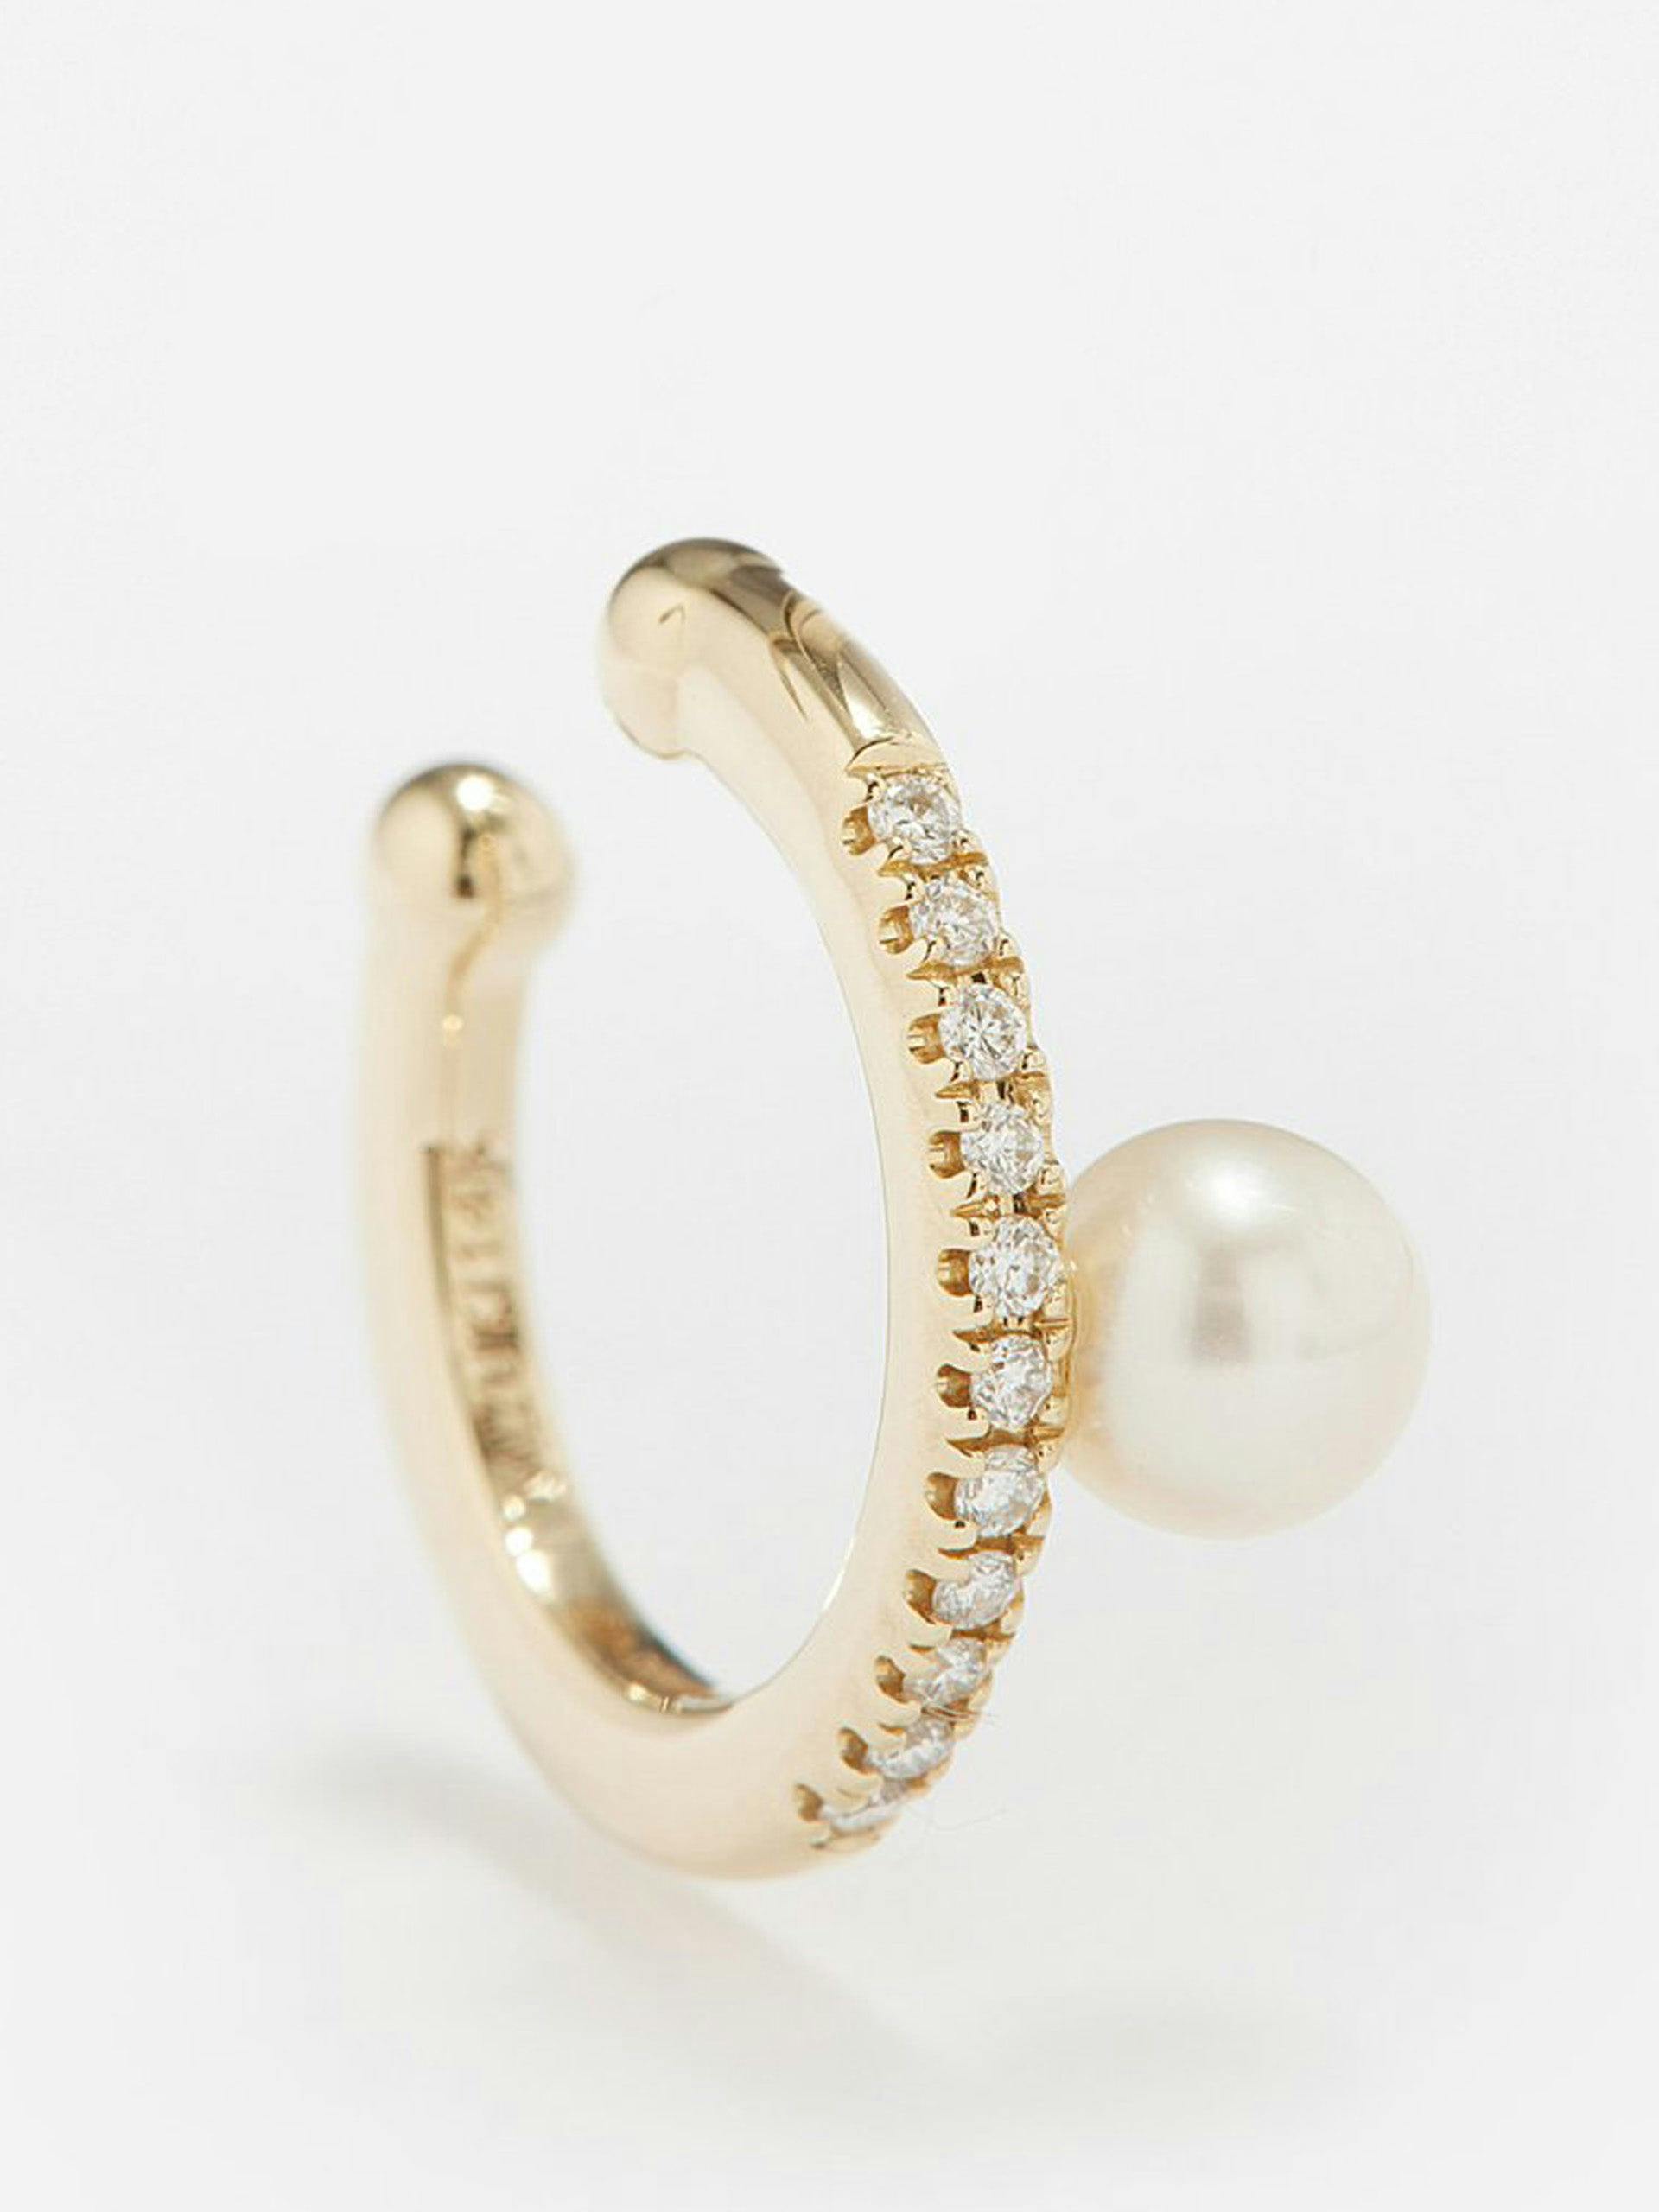 Diamond, pearl and 14kt gold ear cuff